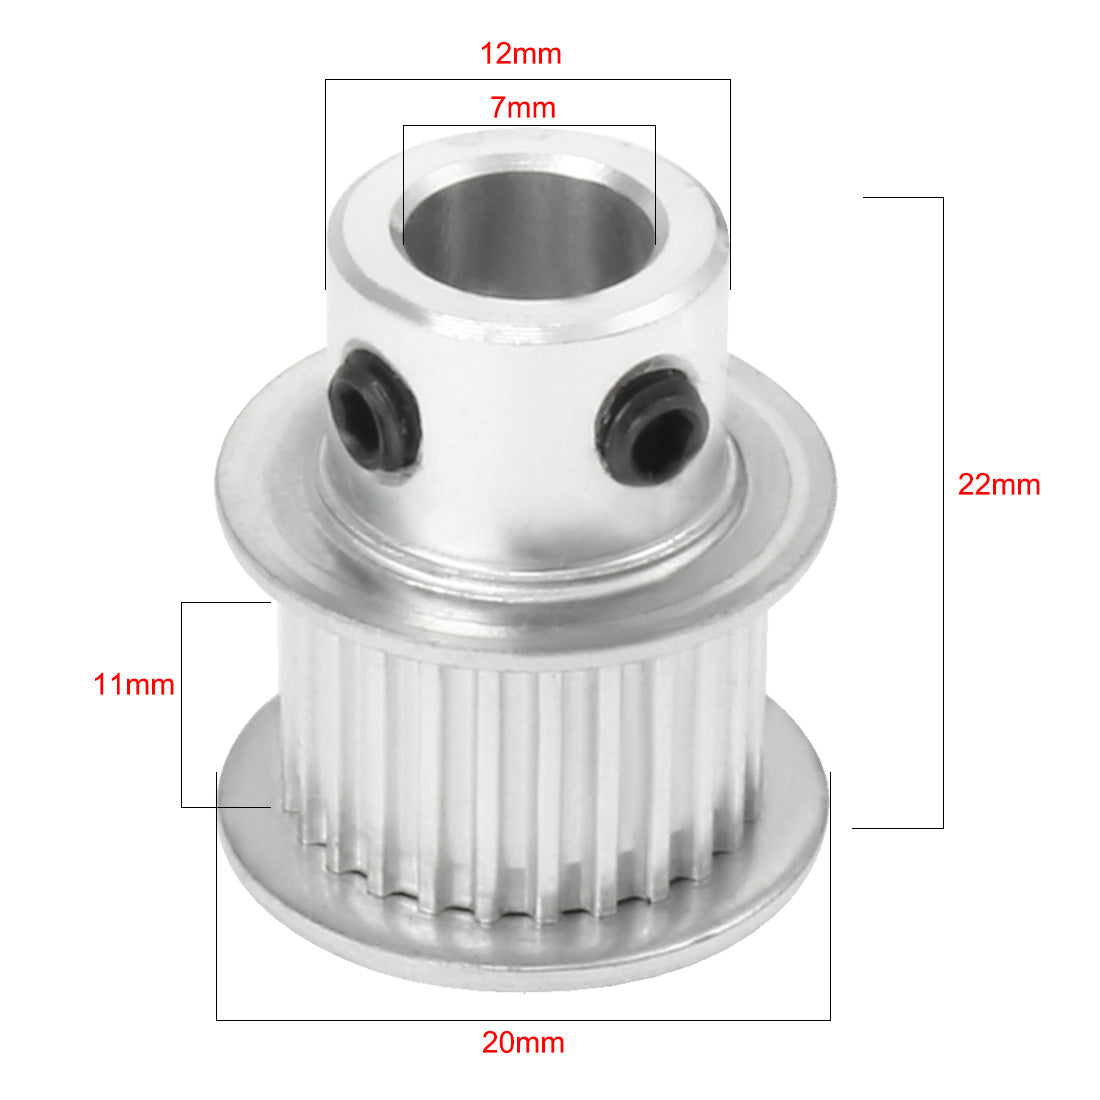 uxcell Uxcell Aluminum M-X-L 25 Teeth 7mm Bore Timing Belt Idler Pulley Flange Synchronous Wheel for 10mm Belt 3D Printer CNC